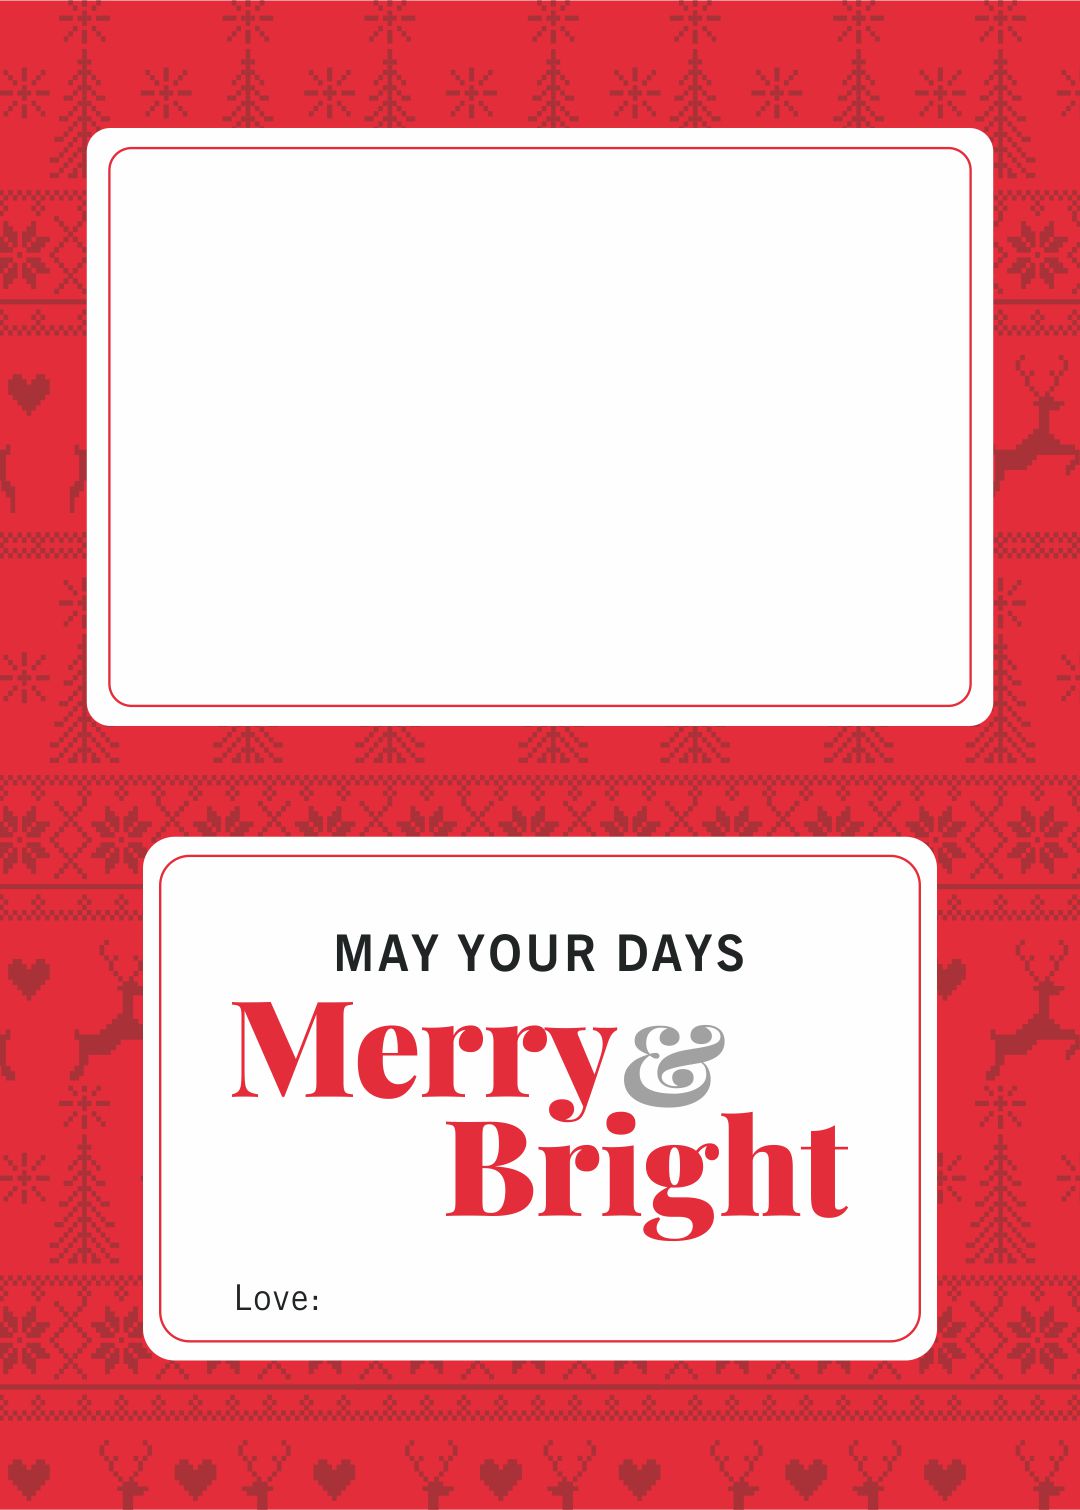 7-best-images-of-merry-christmas-printable-teacher-gift-card-thanks-a